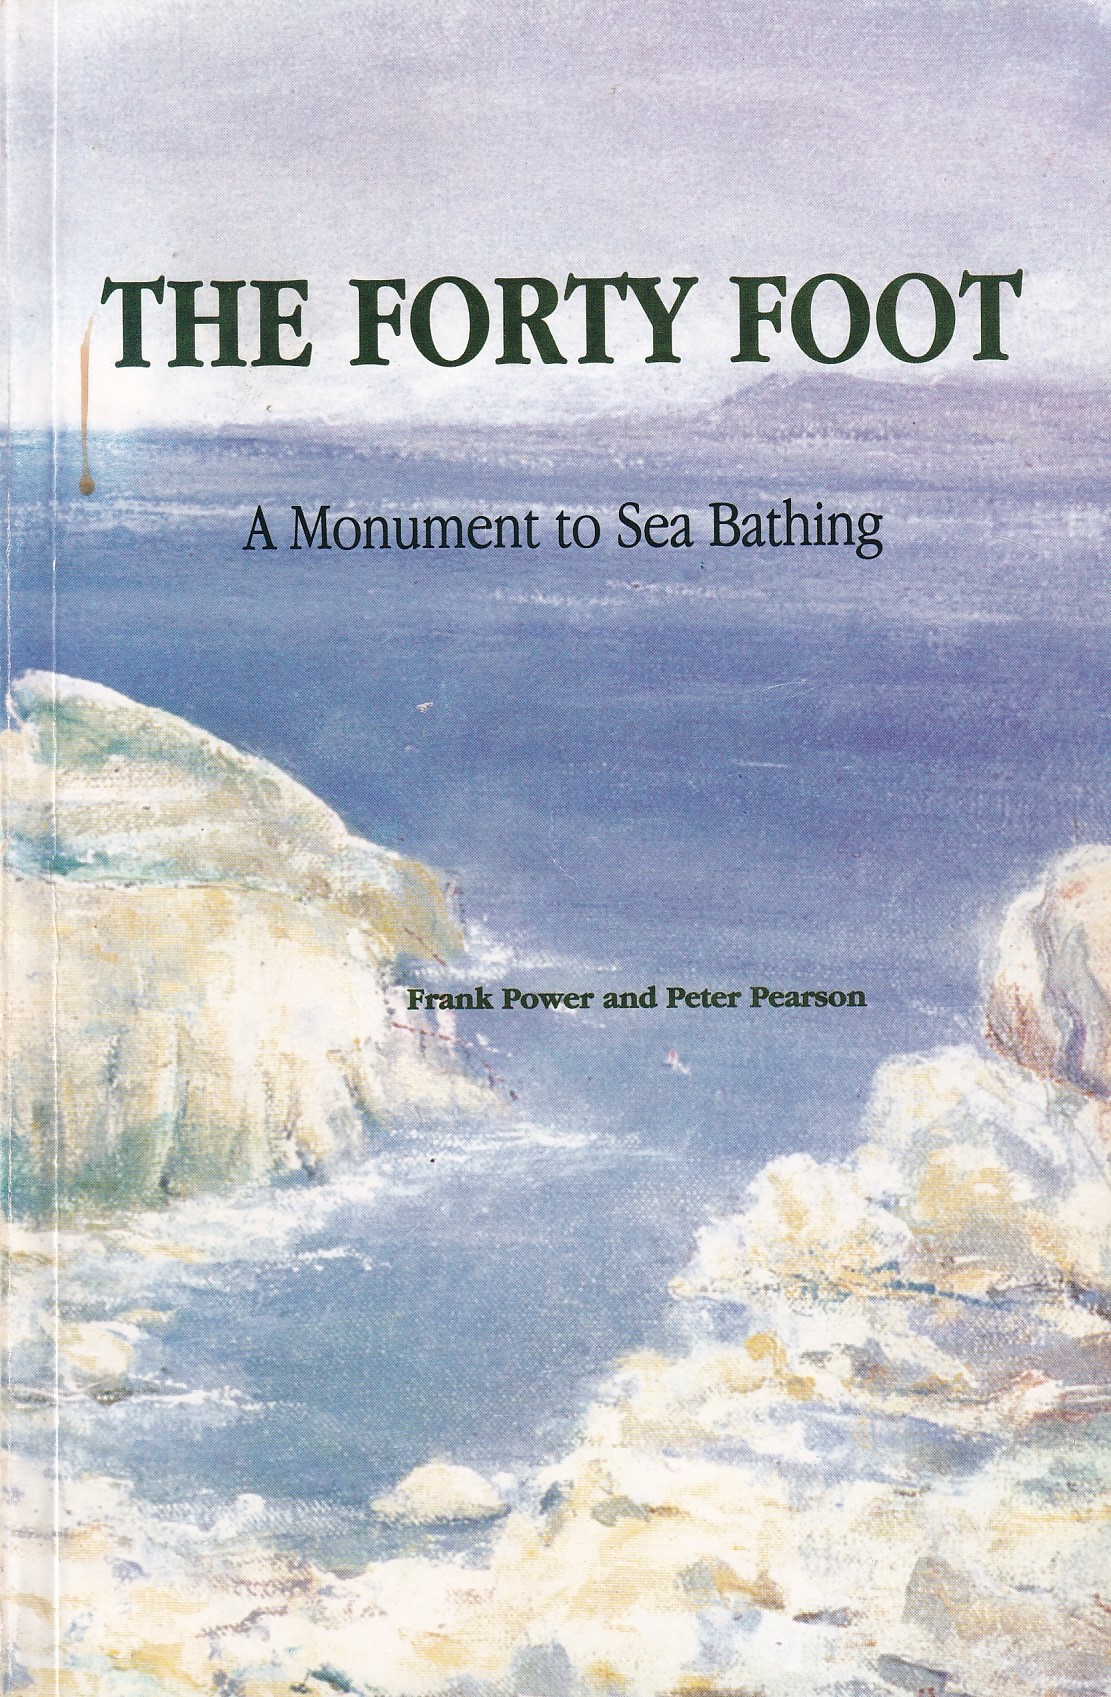 The Forty Foot: a Monument to Sea Bathing by Frank Power and Peter Pearson